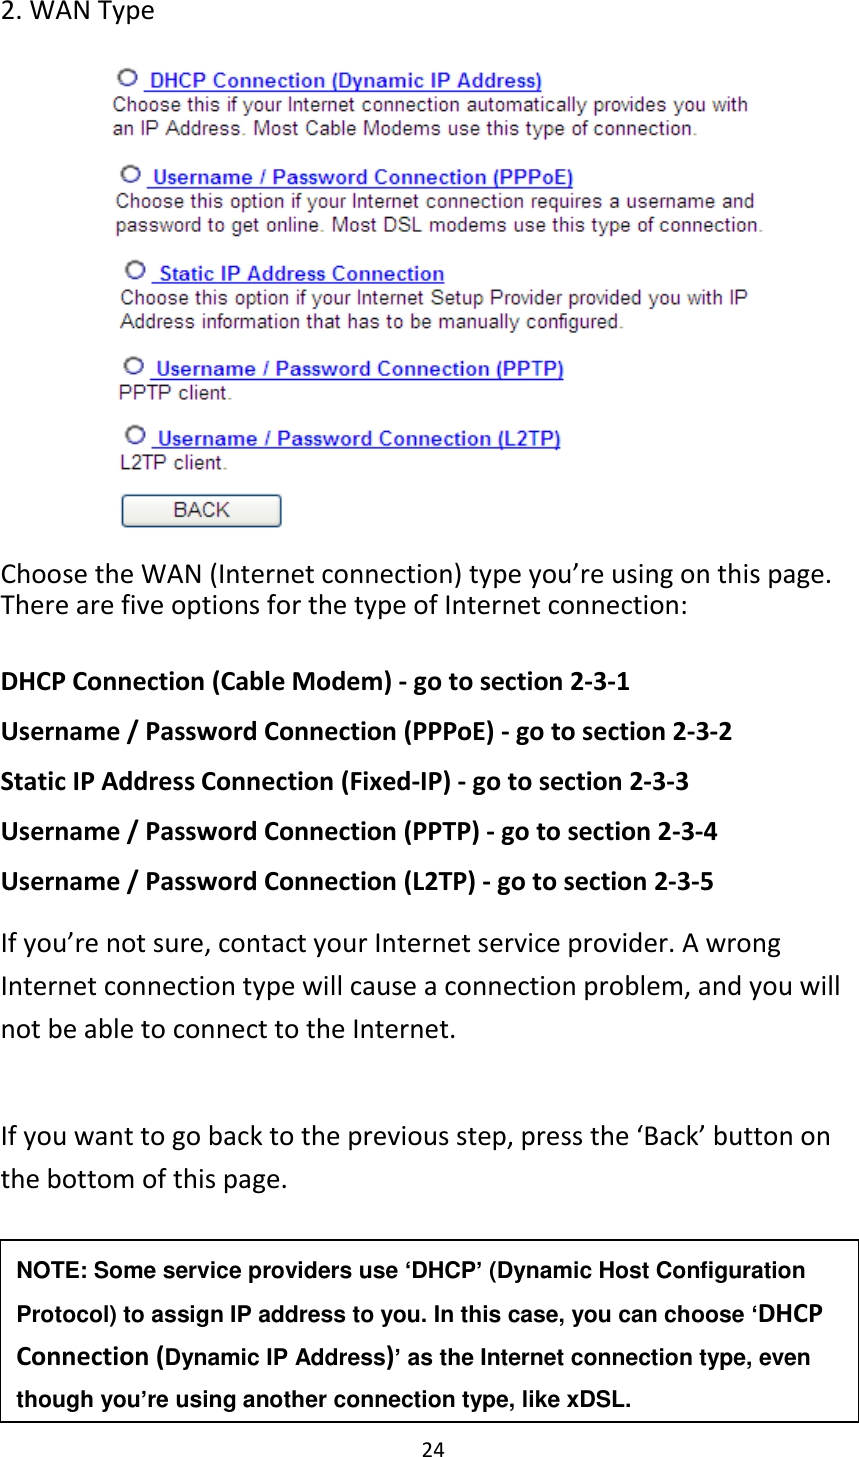 24 2. WAN Type          Choose the WAN (Internet connection) type you’re using on this page. There are five options for the type of Internet connection:  DHCP Connection (Cable Modem) - go to section 2-3-1 Username / Password Connection (PPPoE) - go to section 2-3-2 Static IP Address Connection (Fixed-IP) - go to section 2-3-3 Username / Password Connection (PPTP) - go to section 2-3-4 Username / Password Connection (L2TP) - go to section 2-3-5 If you’re not sure, contact your Internet service provider. A wrong Internet connection type will cause a connection problem, and you will not be able to connect to the Internet.  If you want to go back to the previous step, press the ‘Back’ button on the bottom of this page.   NOTE: Some service providers use ‘DHCP’ (Dynamic Host Configuration Protocol) to assign IP address to you. In this case, you can choose ‘DHCP Connection (Dynamic IP Address)’ as the Internet connection type, even though you’re using another connection type, like xDSL. 